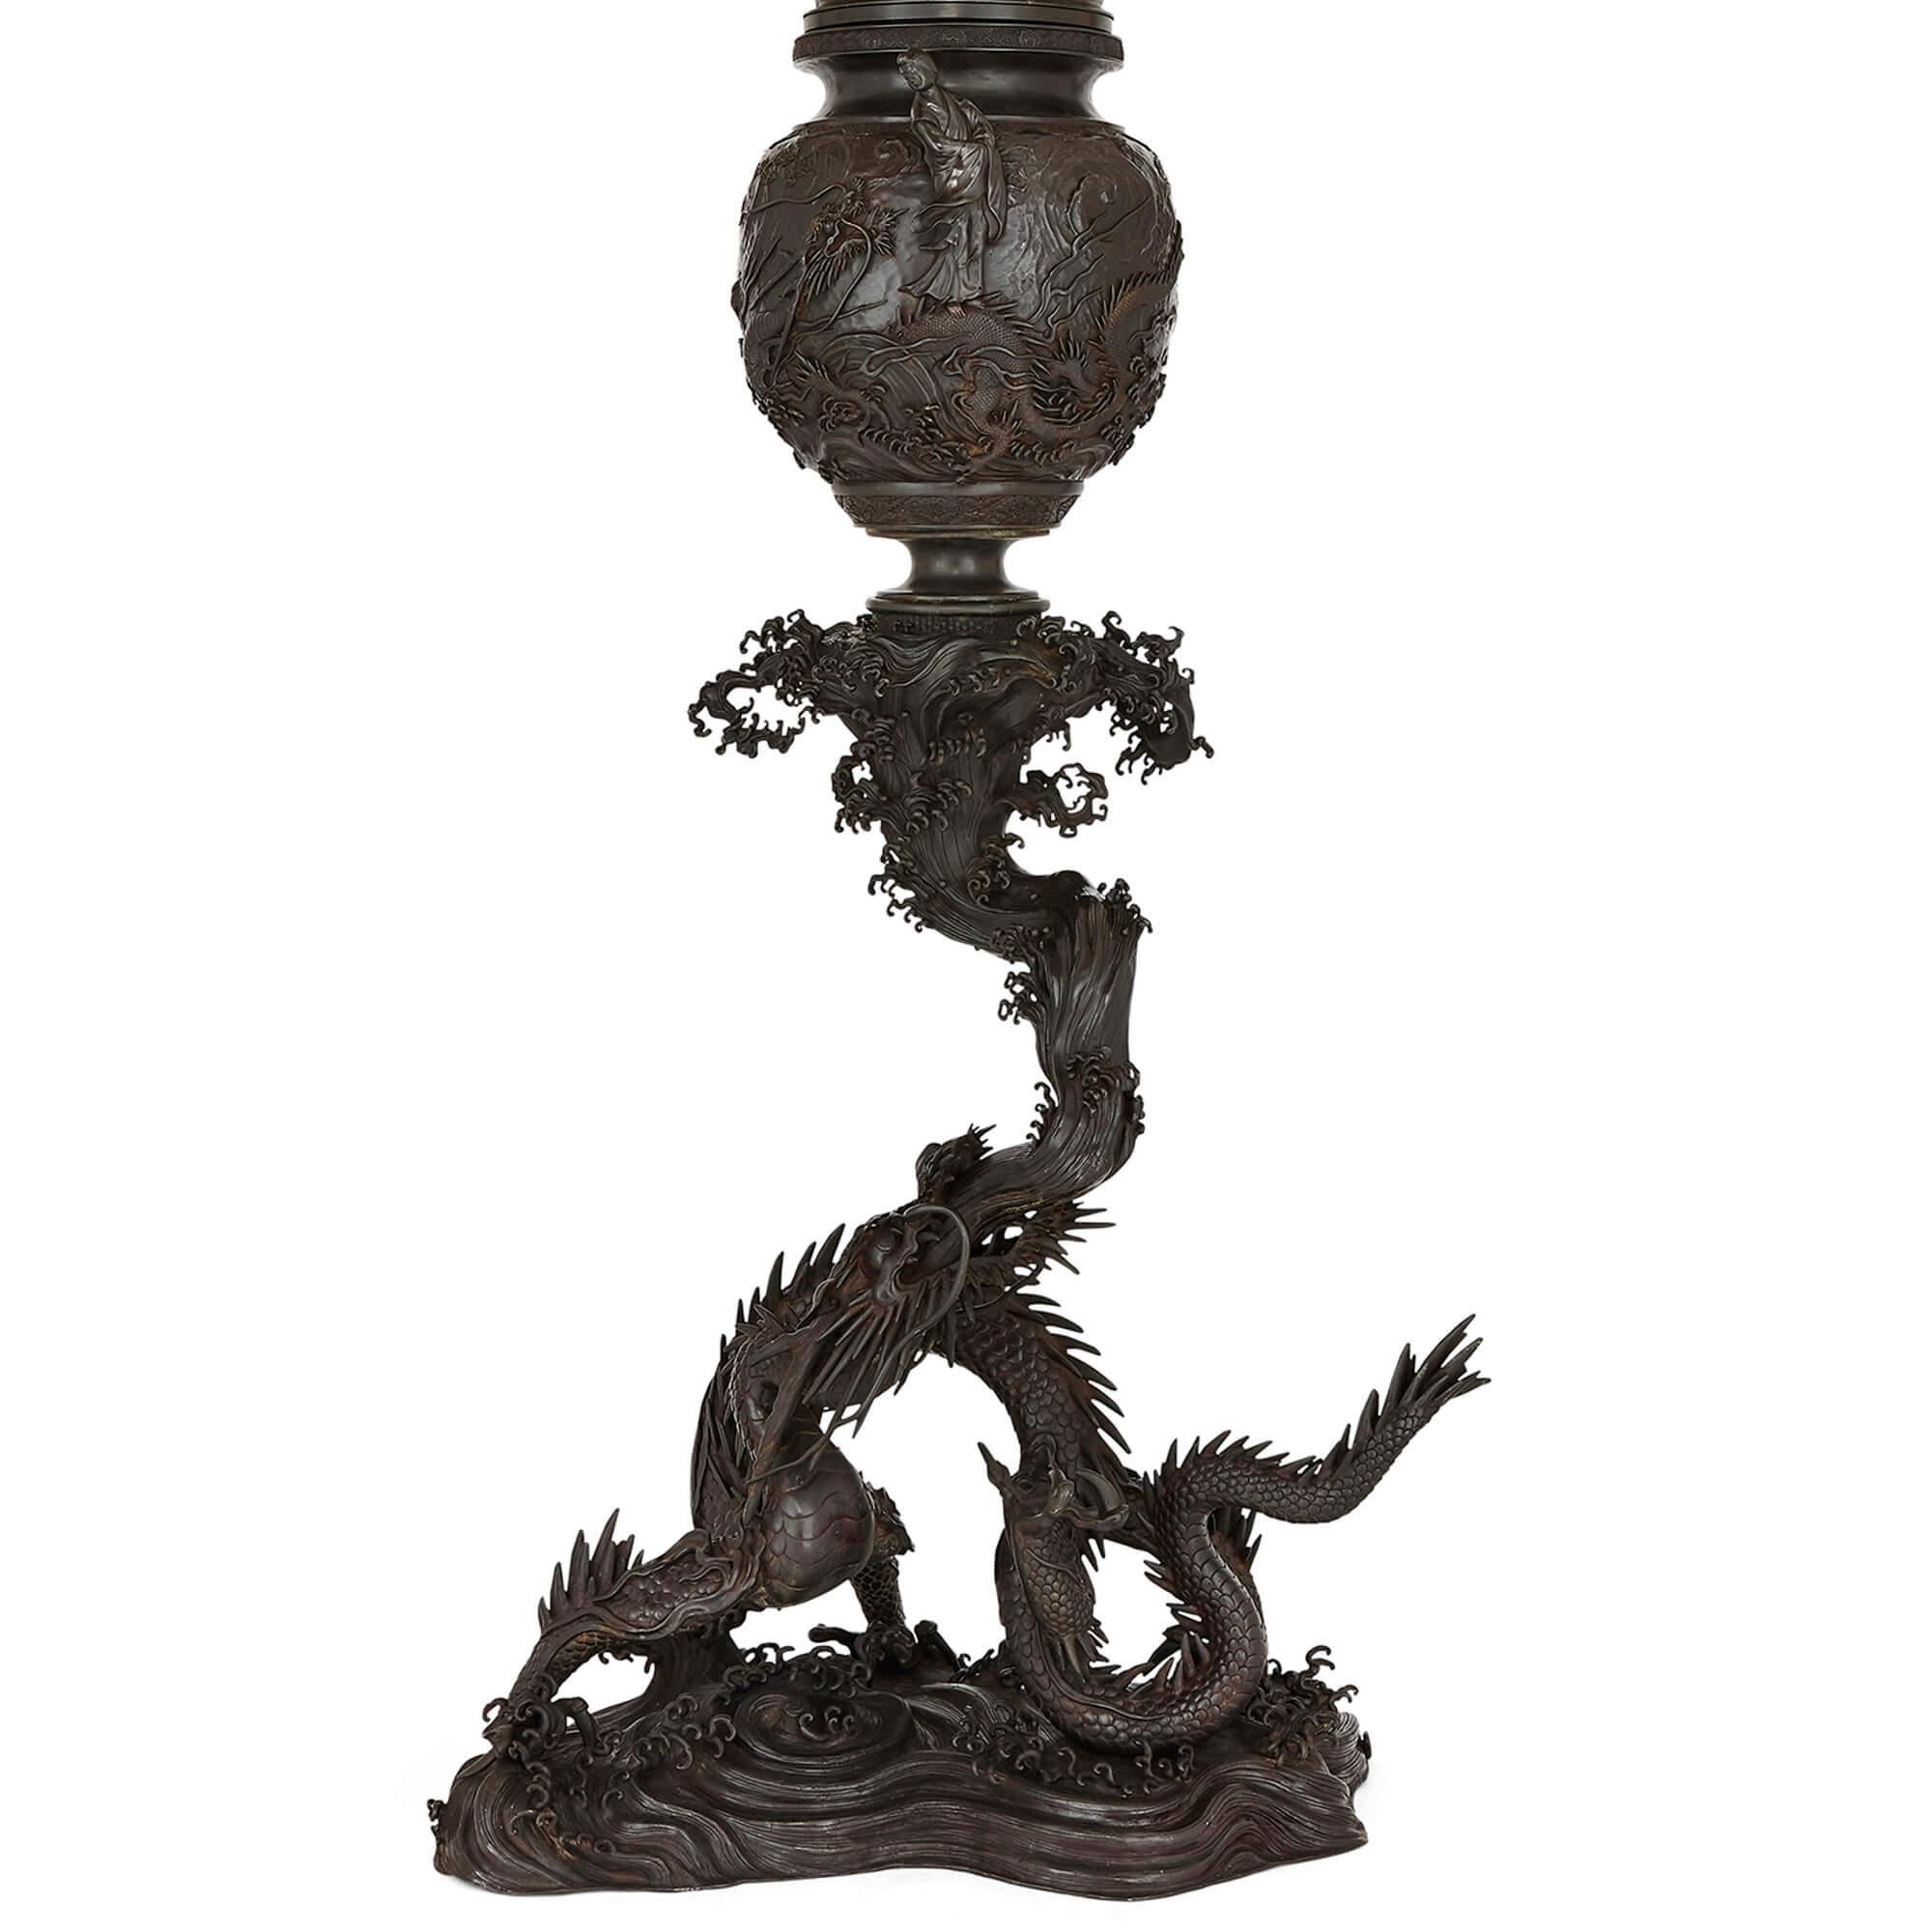 Large patinated bronze Japanese koro incense burner
Japanese, late 19th Century
Dimensions: Height 221cm, width 97cm, depth 57cm

This monumental koro is modelled from patinated bronze as an ovoid bowl surmounted with a tiered and pierced lid